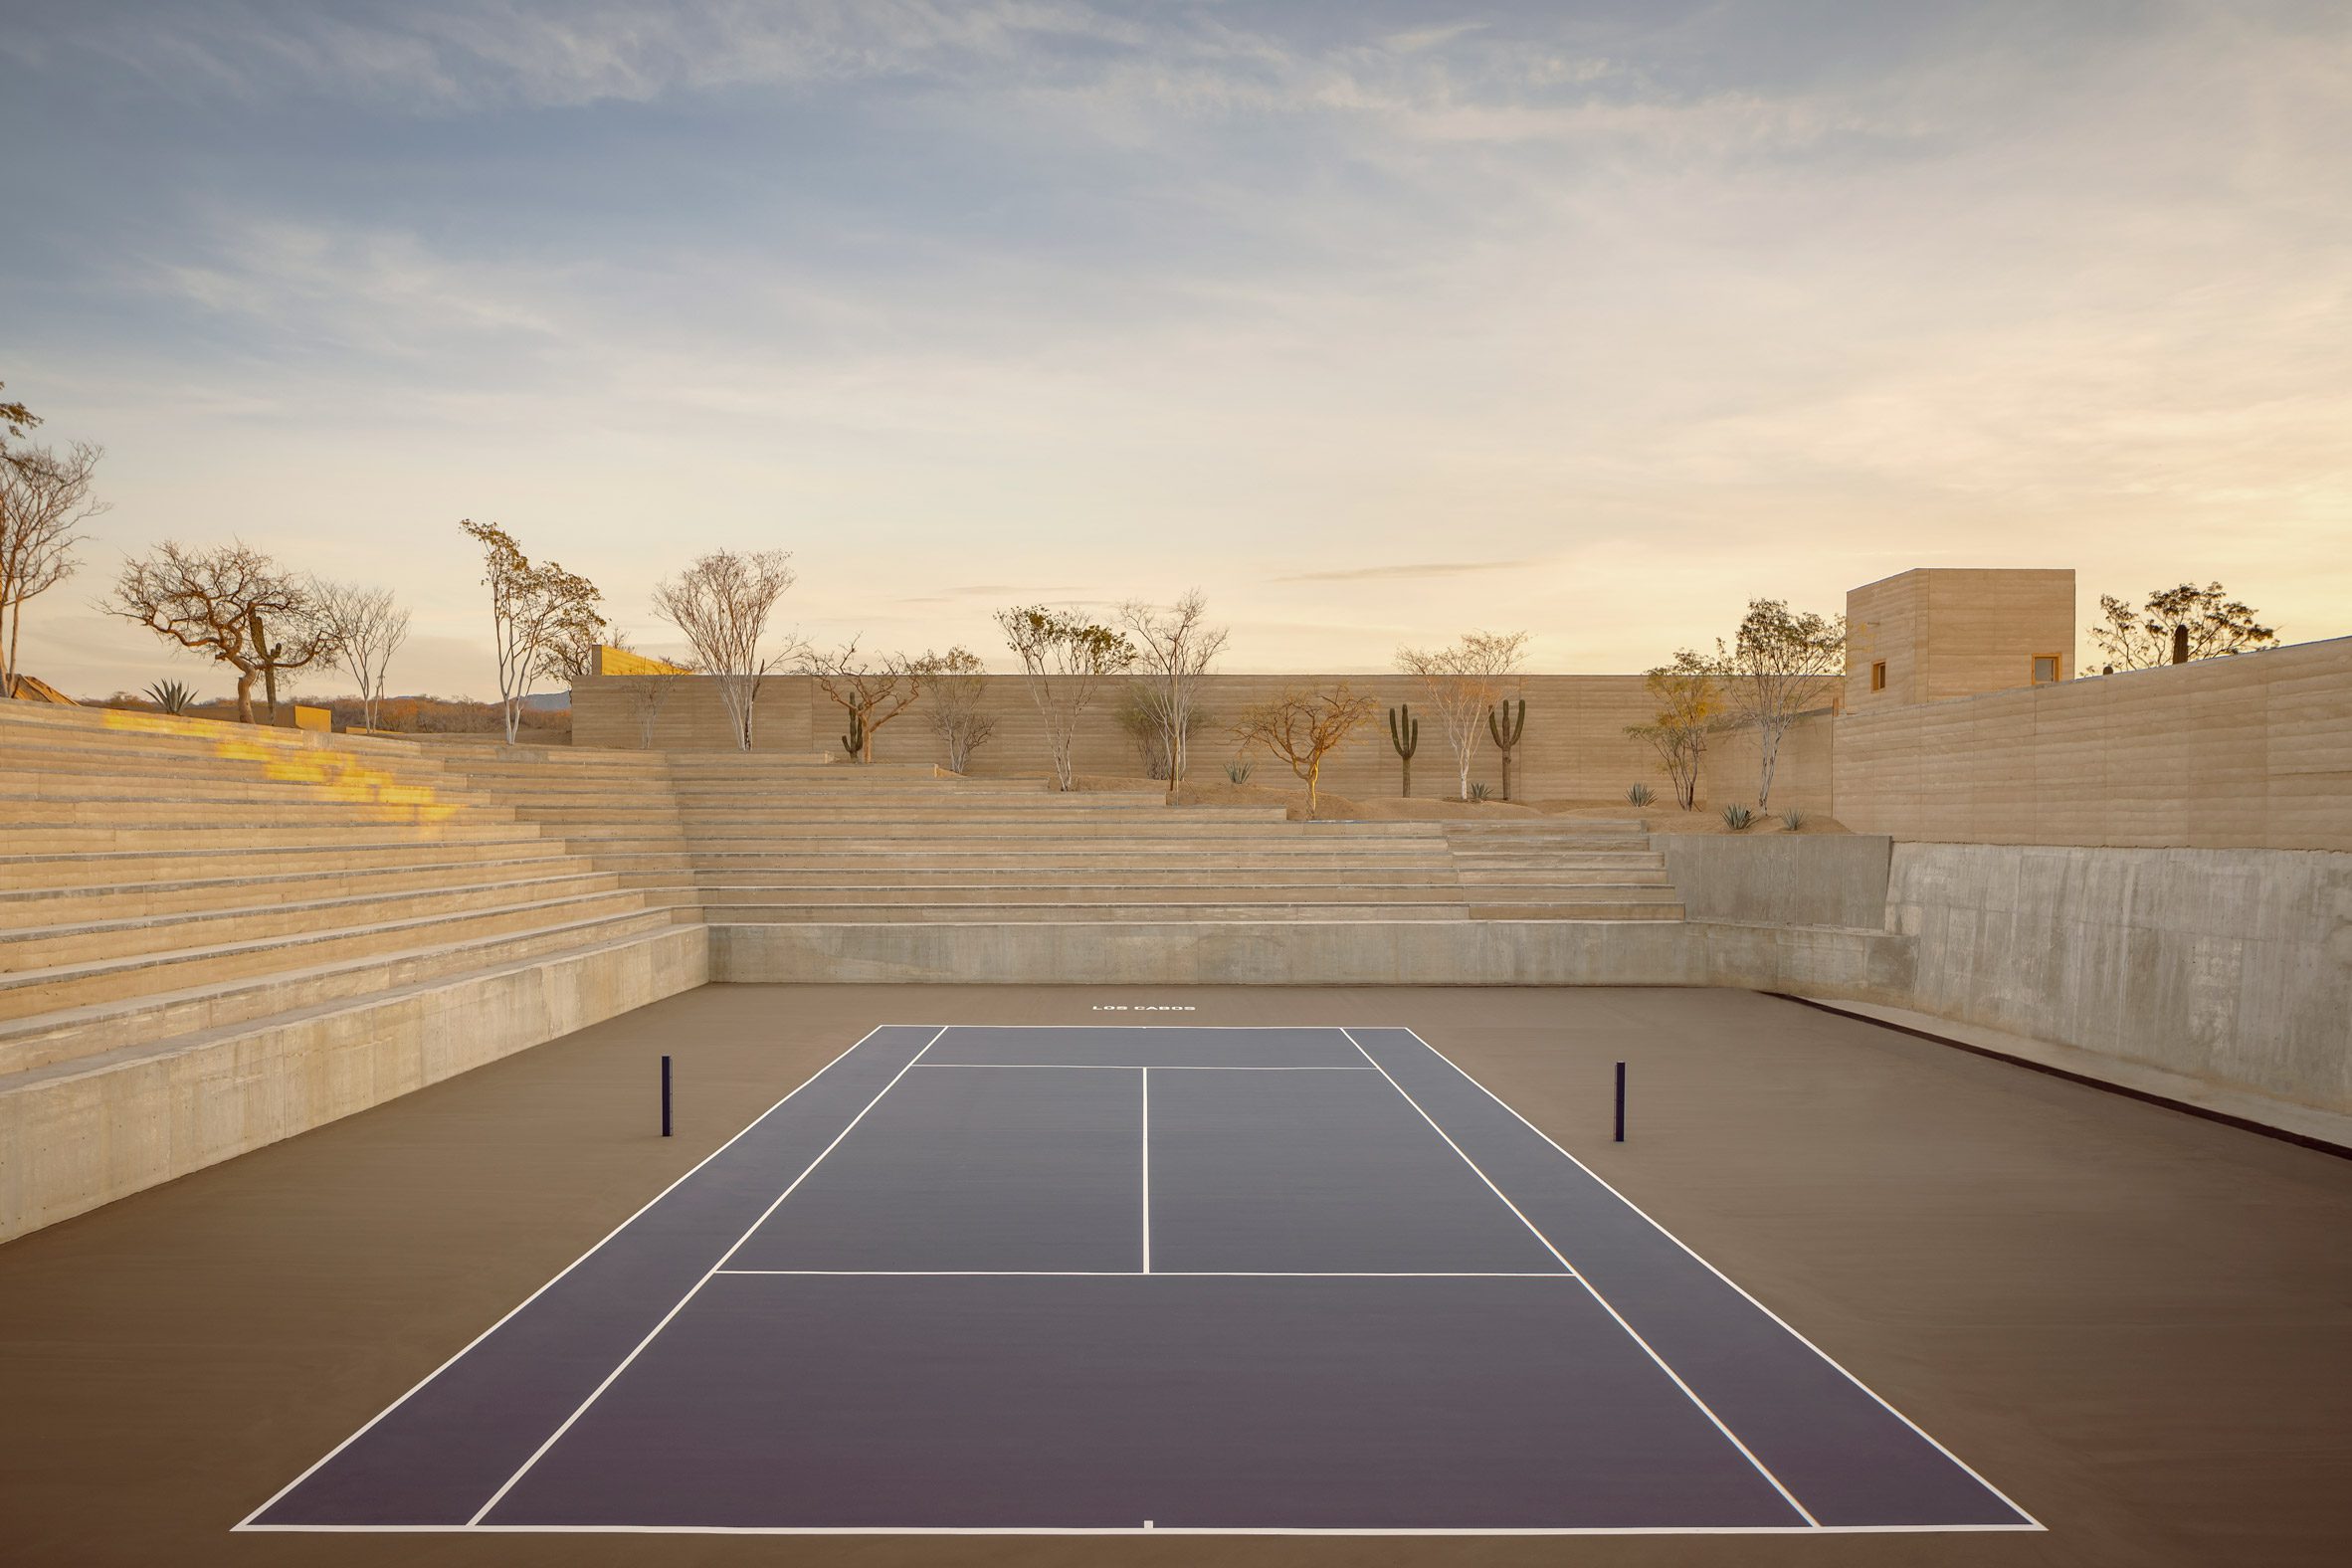 Tennis court at the Cabo Sports Complex